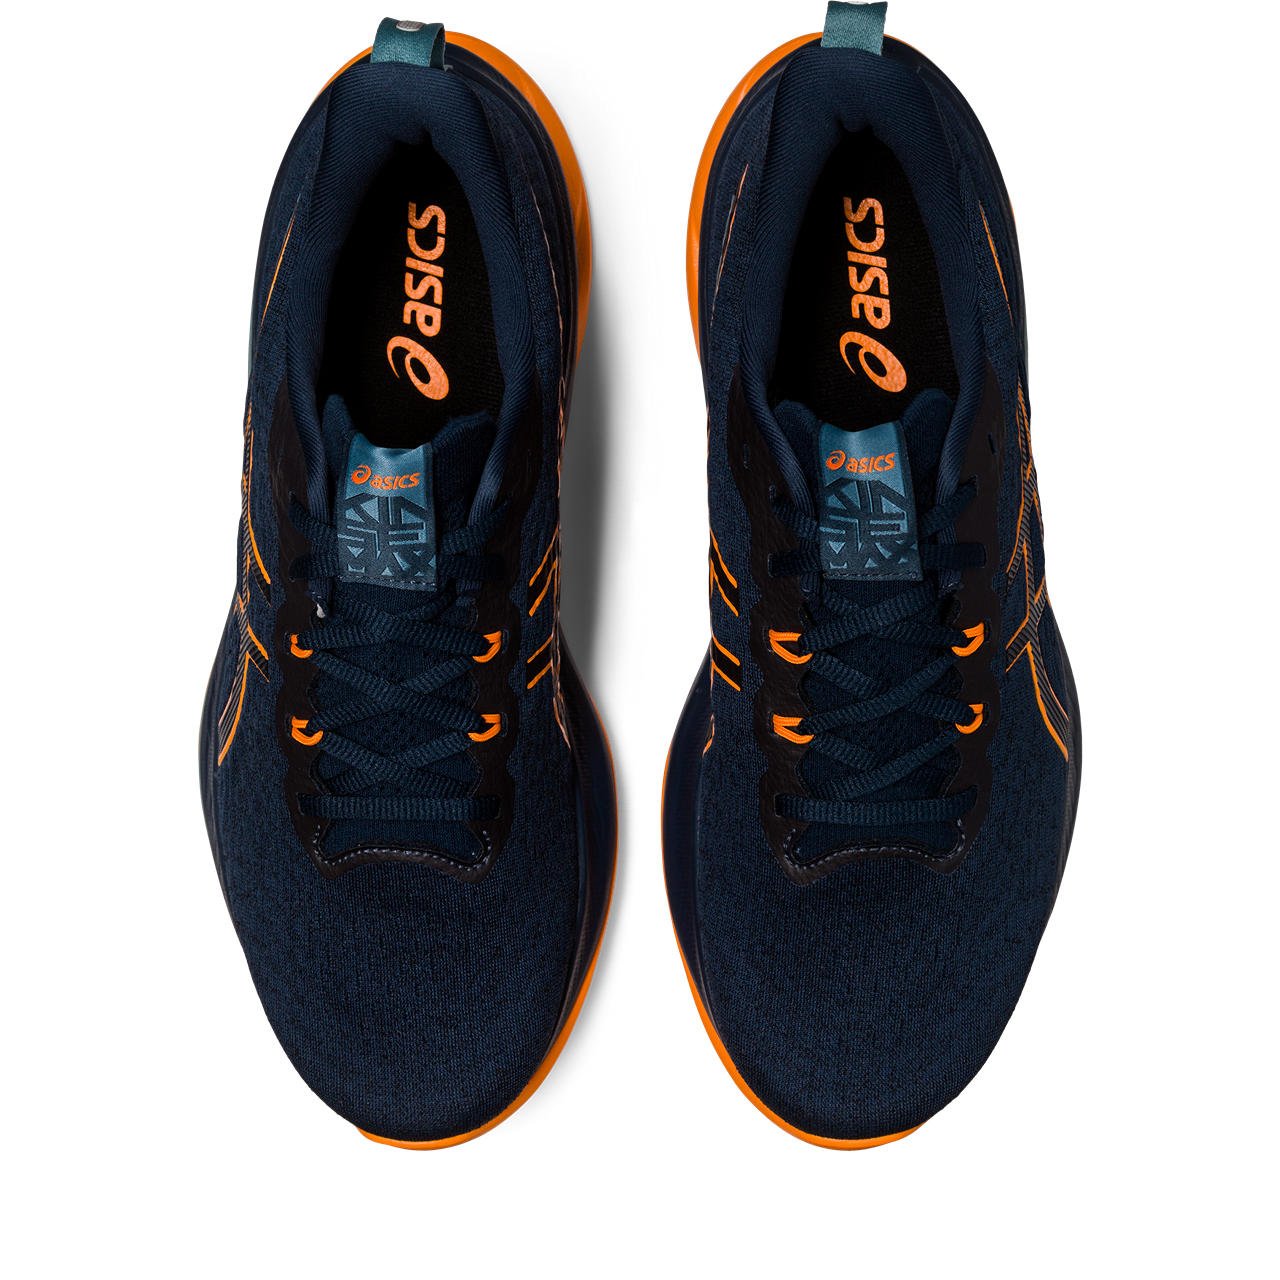 When looking down into the shoe the brand same ASICS is written on the outsole